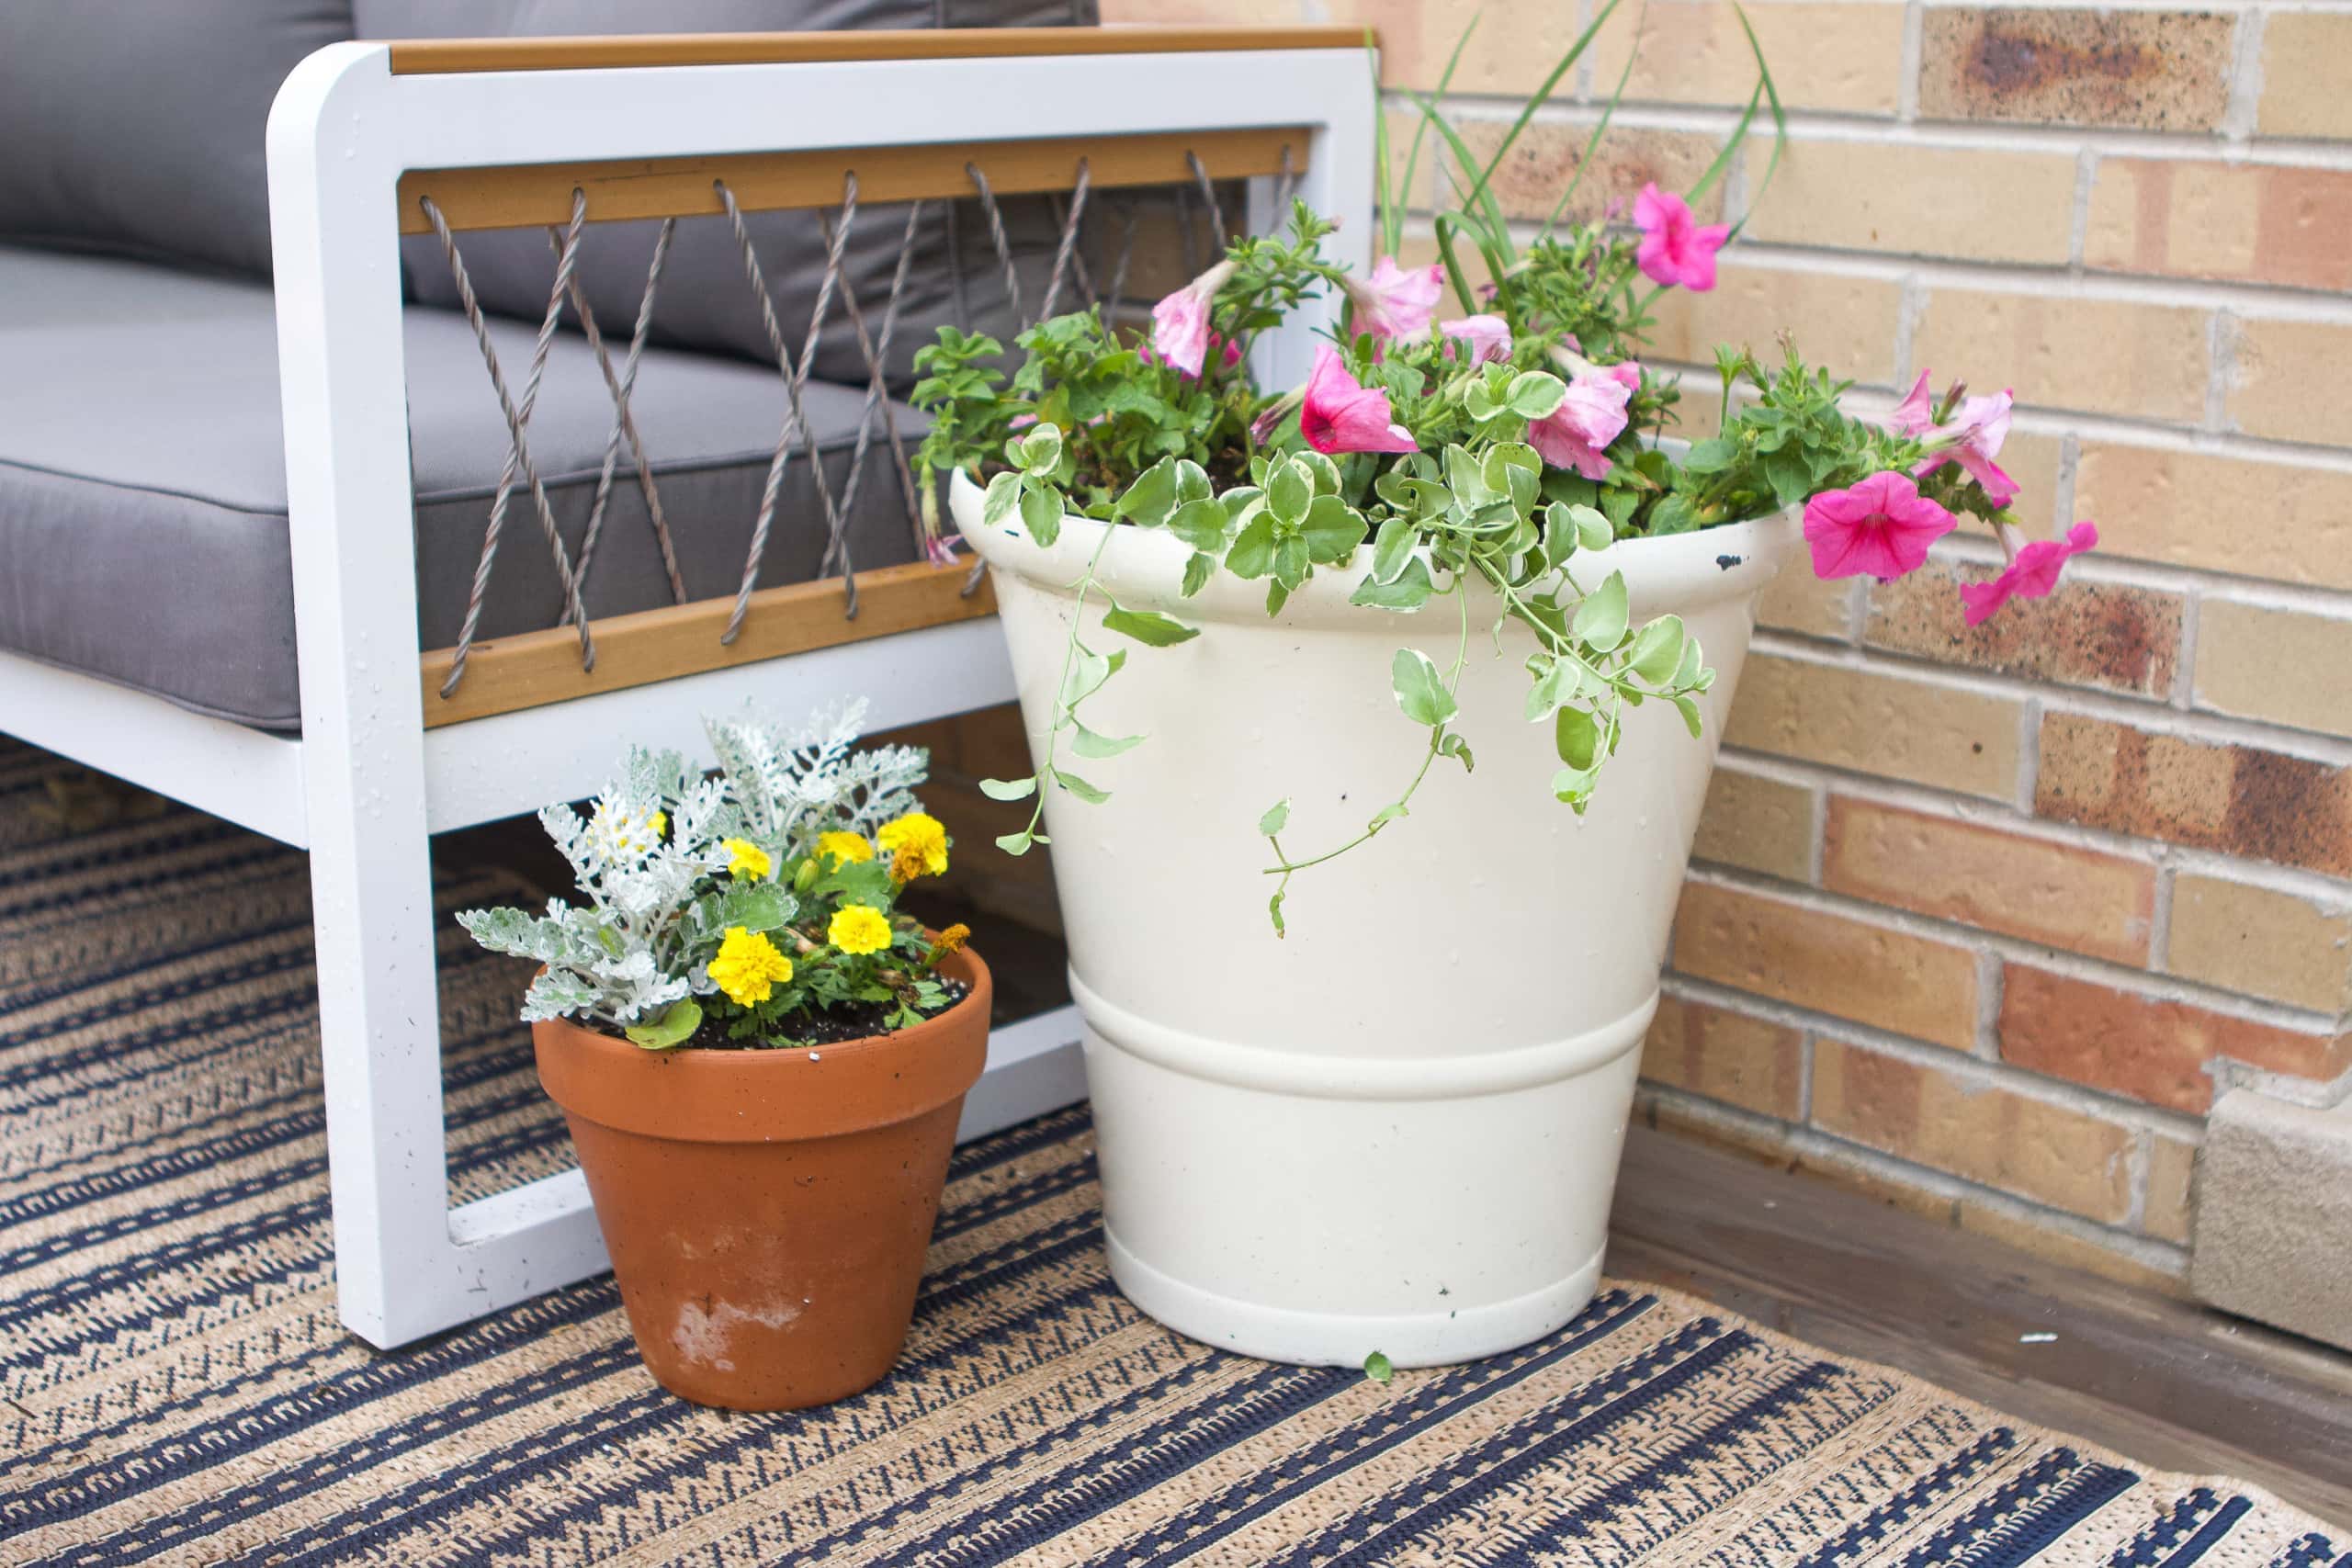 How to plant flowers in a pot